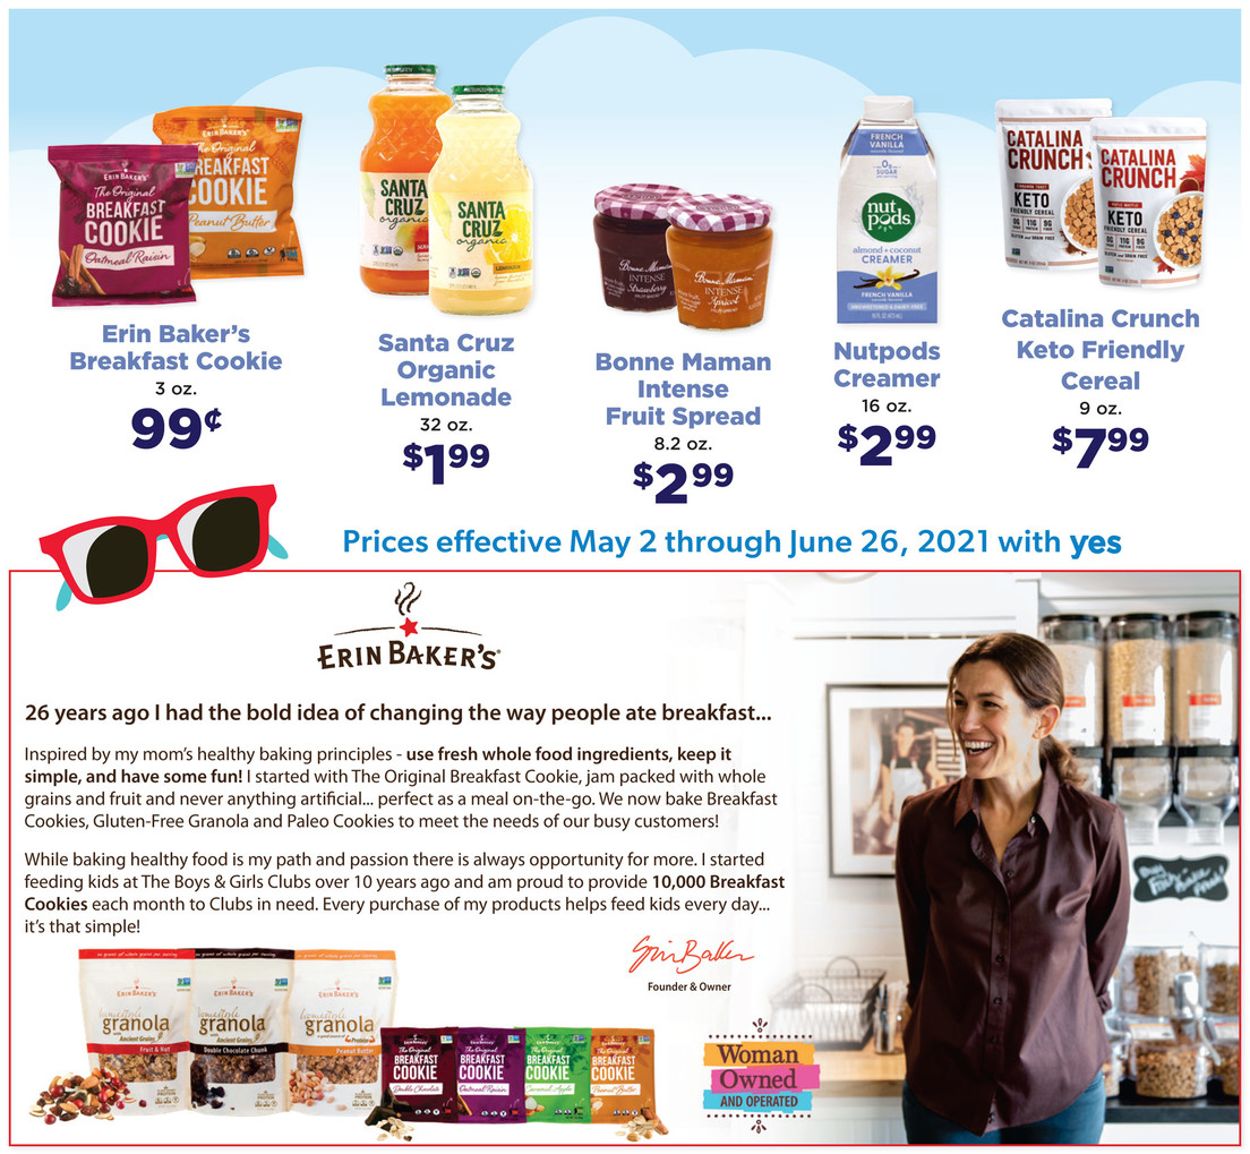 Family Fare Ad from 05/02/2021